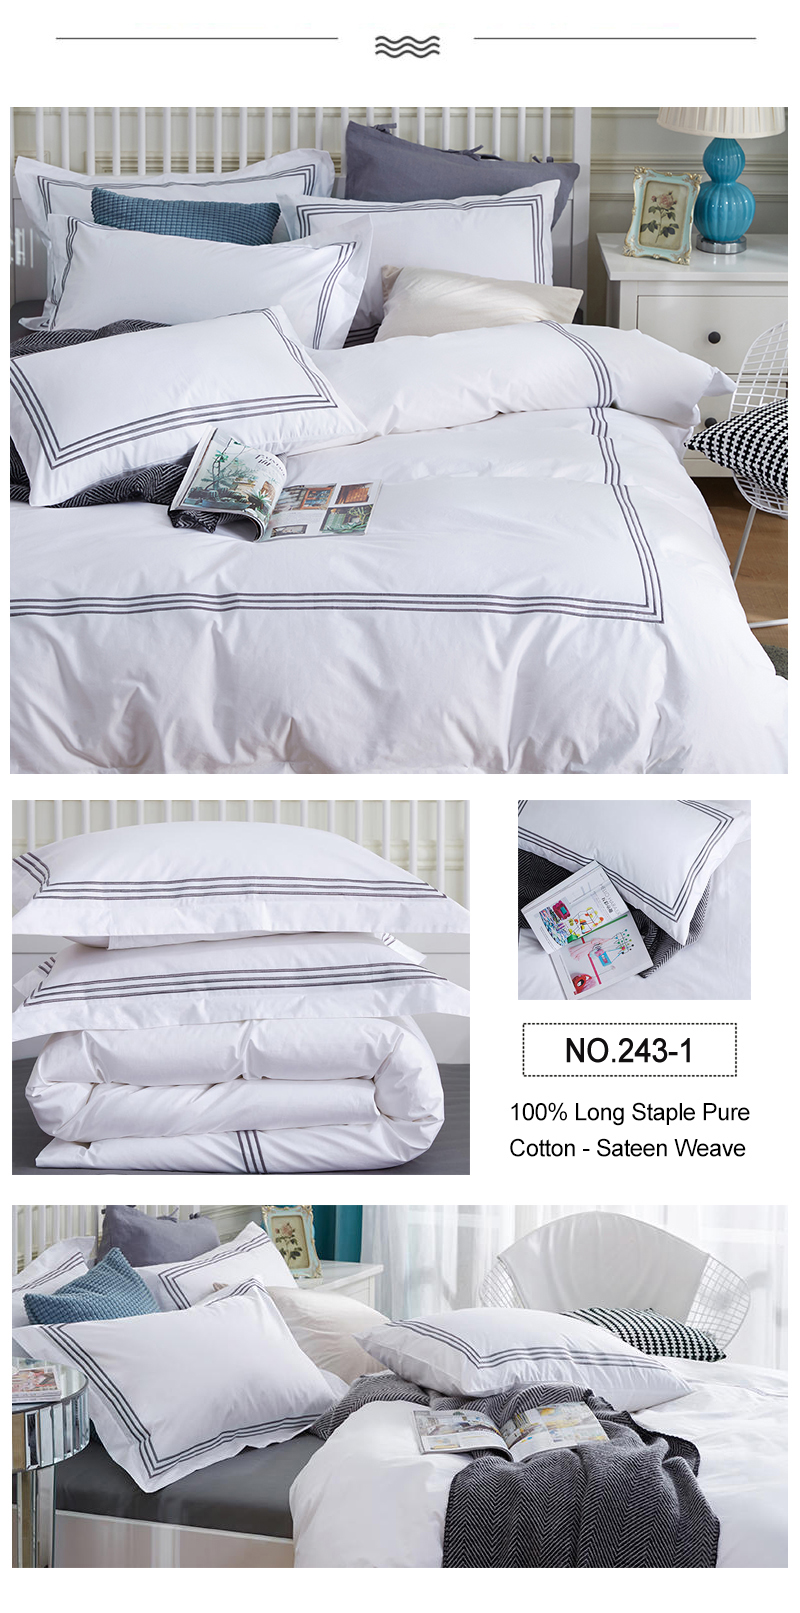 Bed Linen Superior Quality Deluxe